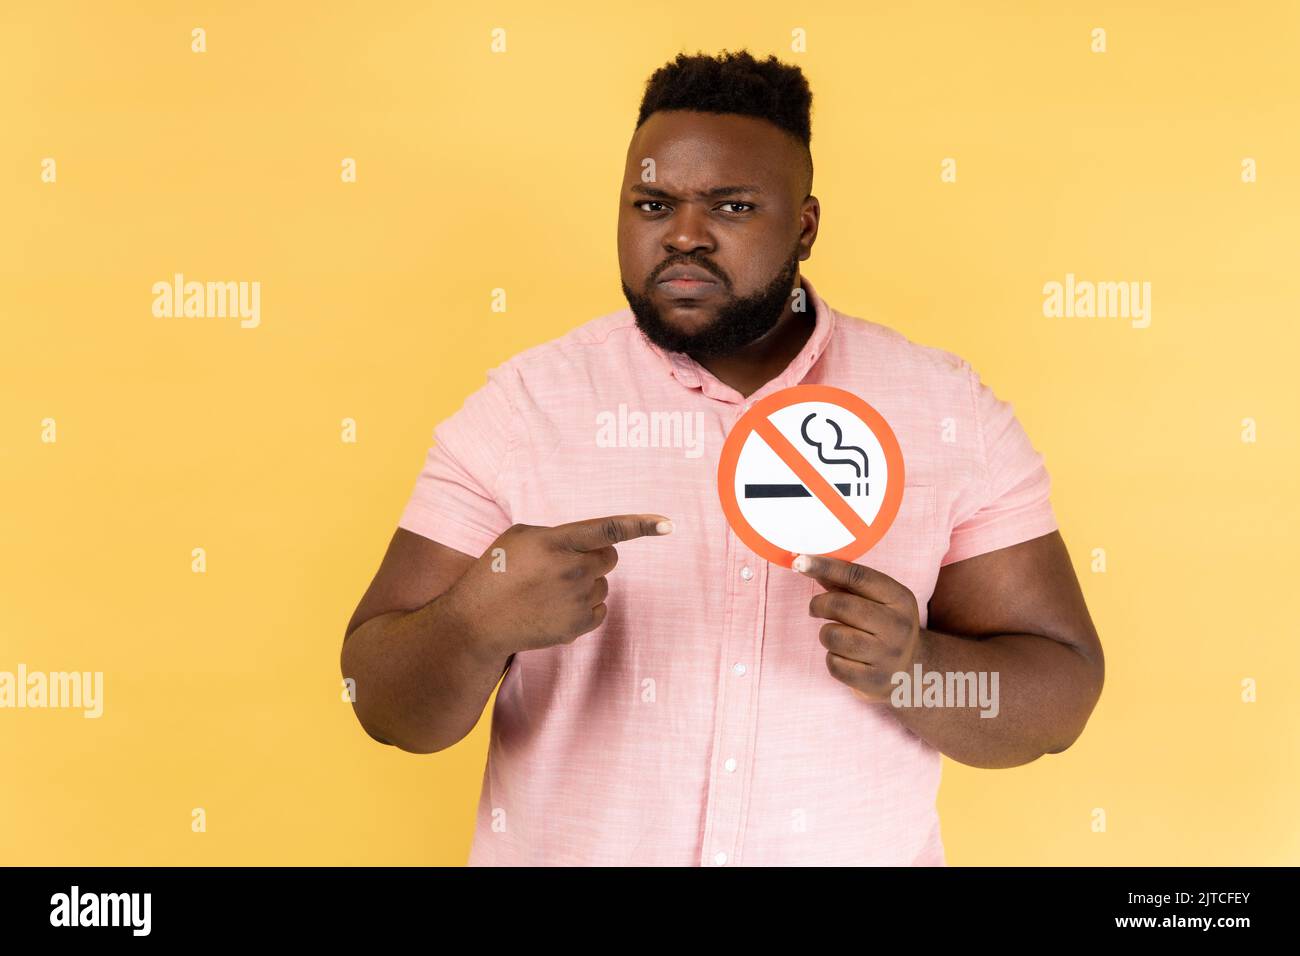 Portrait of serious man wearing pink shirt holding and pointing index finger at no smoking sign in hands, quit smoking, no tobacco day. Indoor studio shot isolated on yellow background. Stock Photo